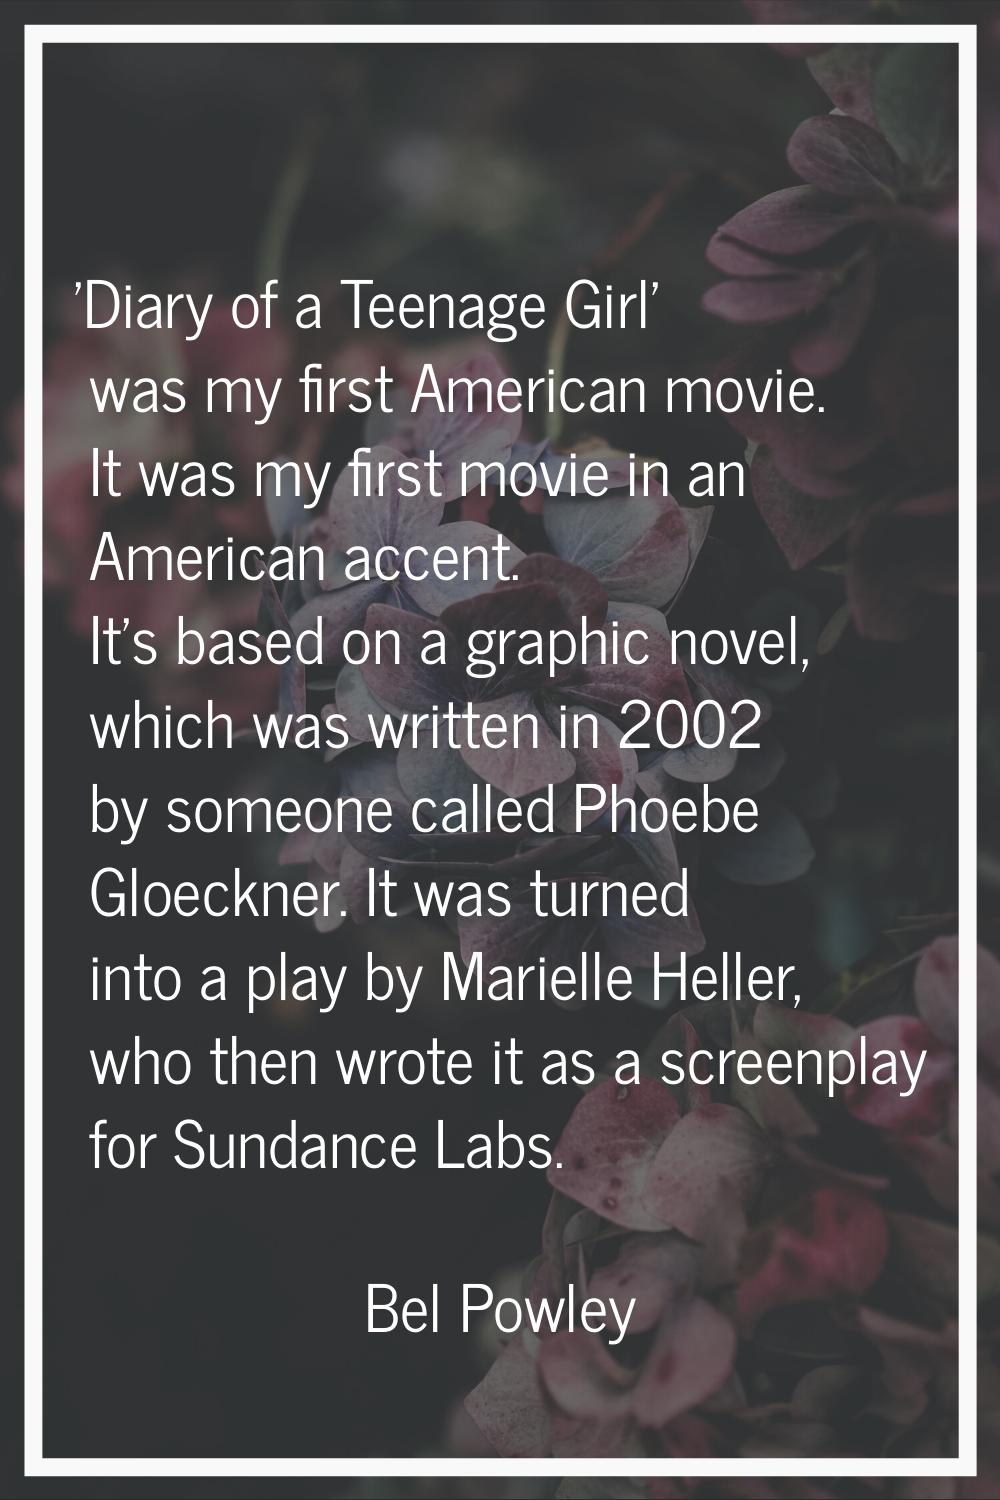 'Diary of a Teenage Girl' was my first American movie. It was my first movie in an American accent.